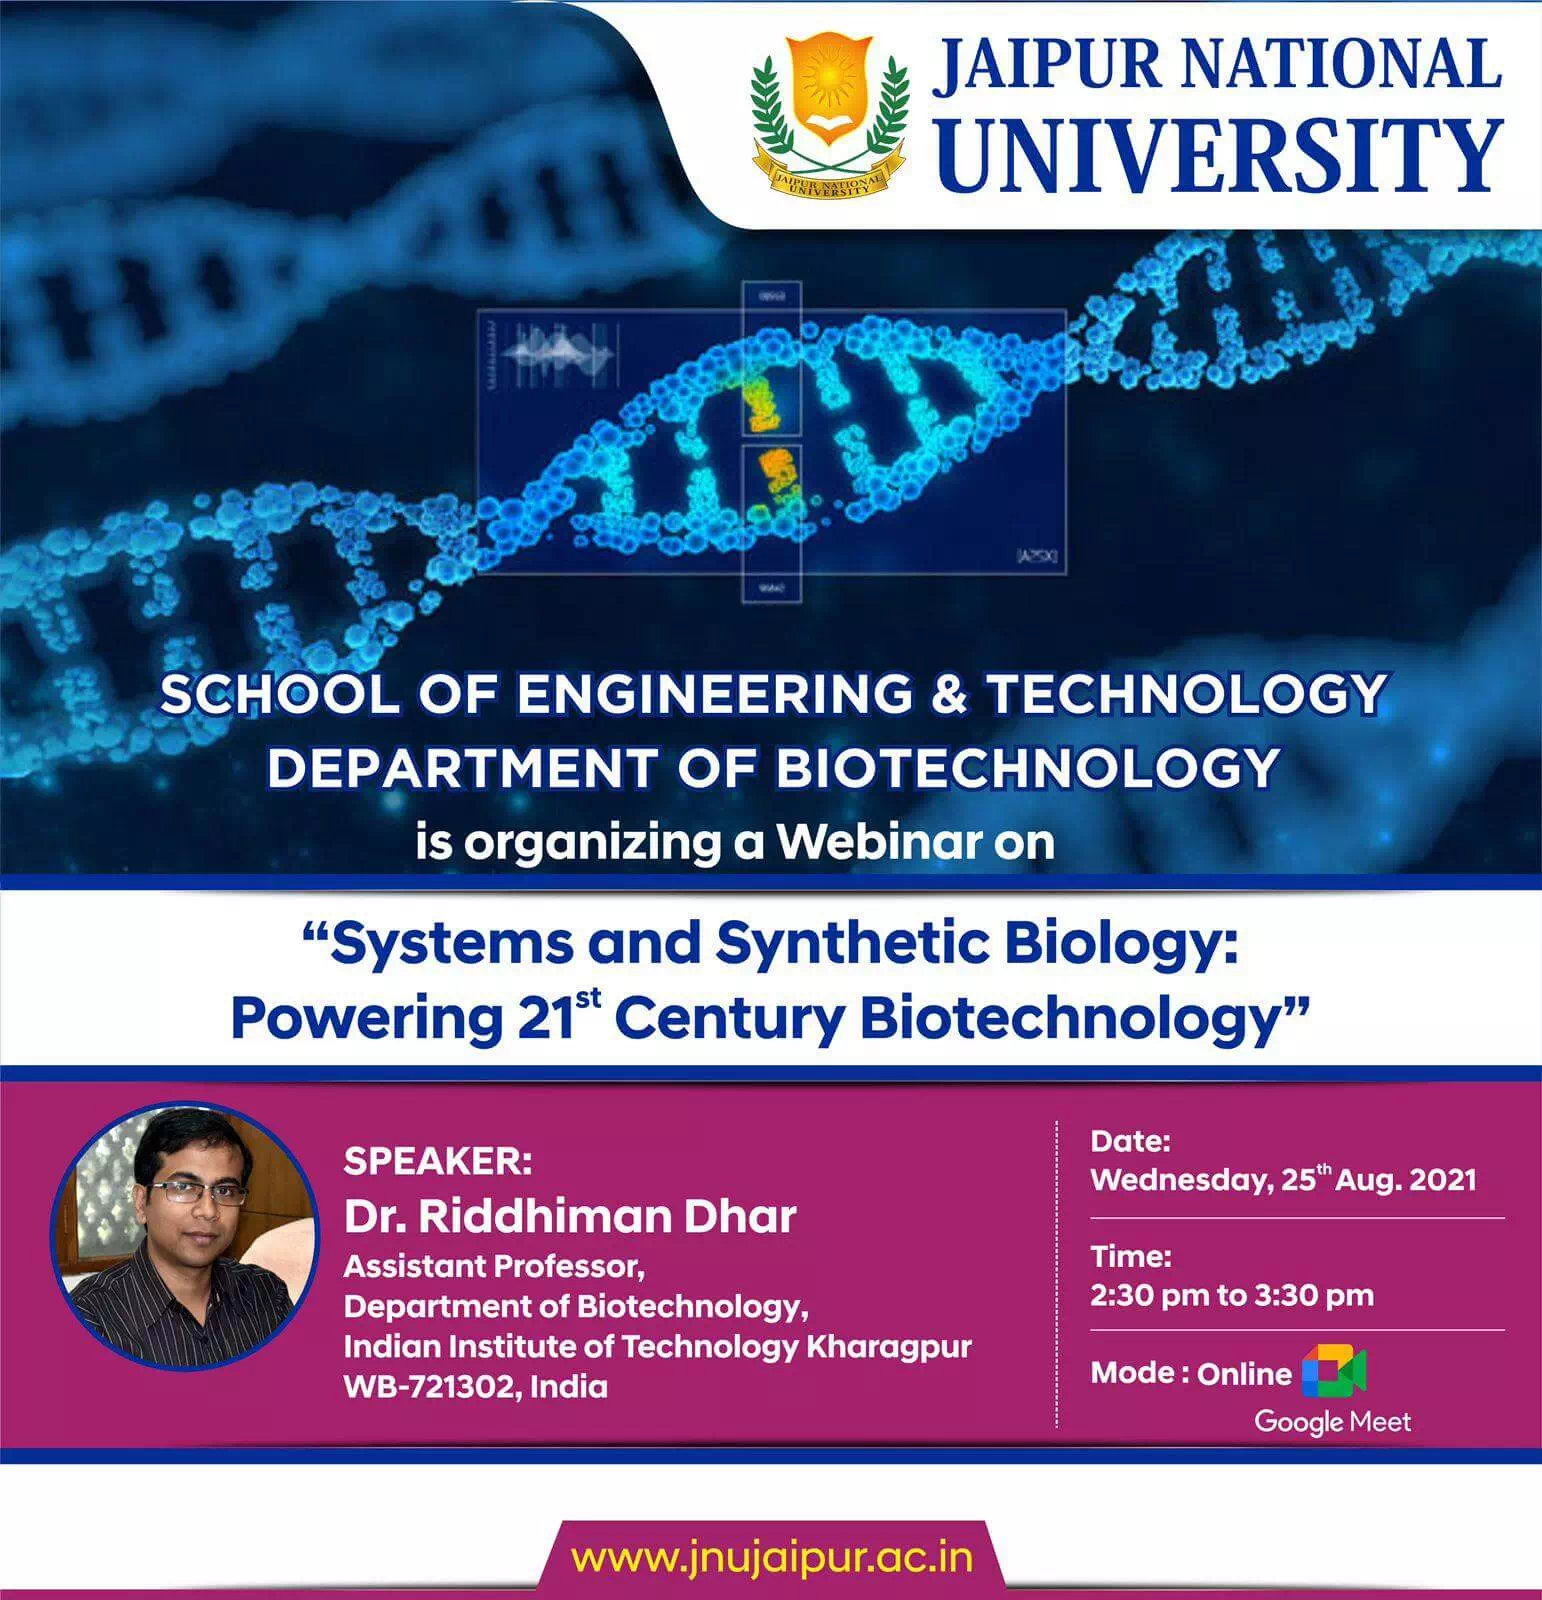 Systems and Synthetic Biology: Powering 21st Century Biotechnology